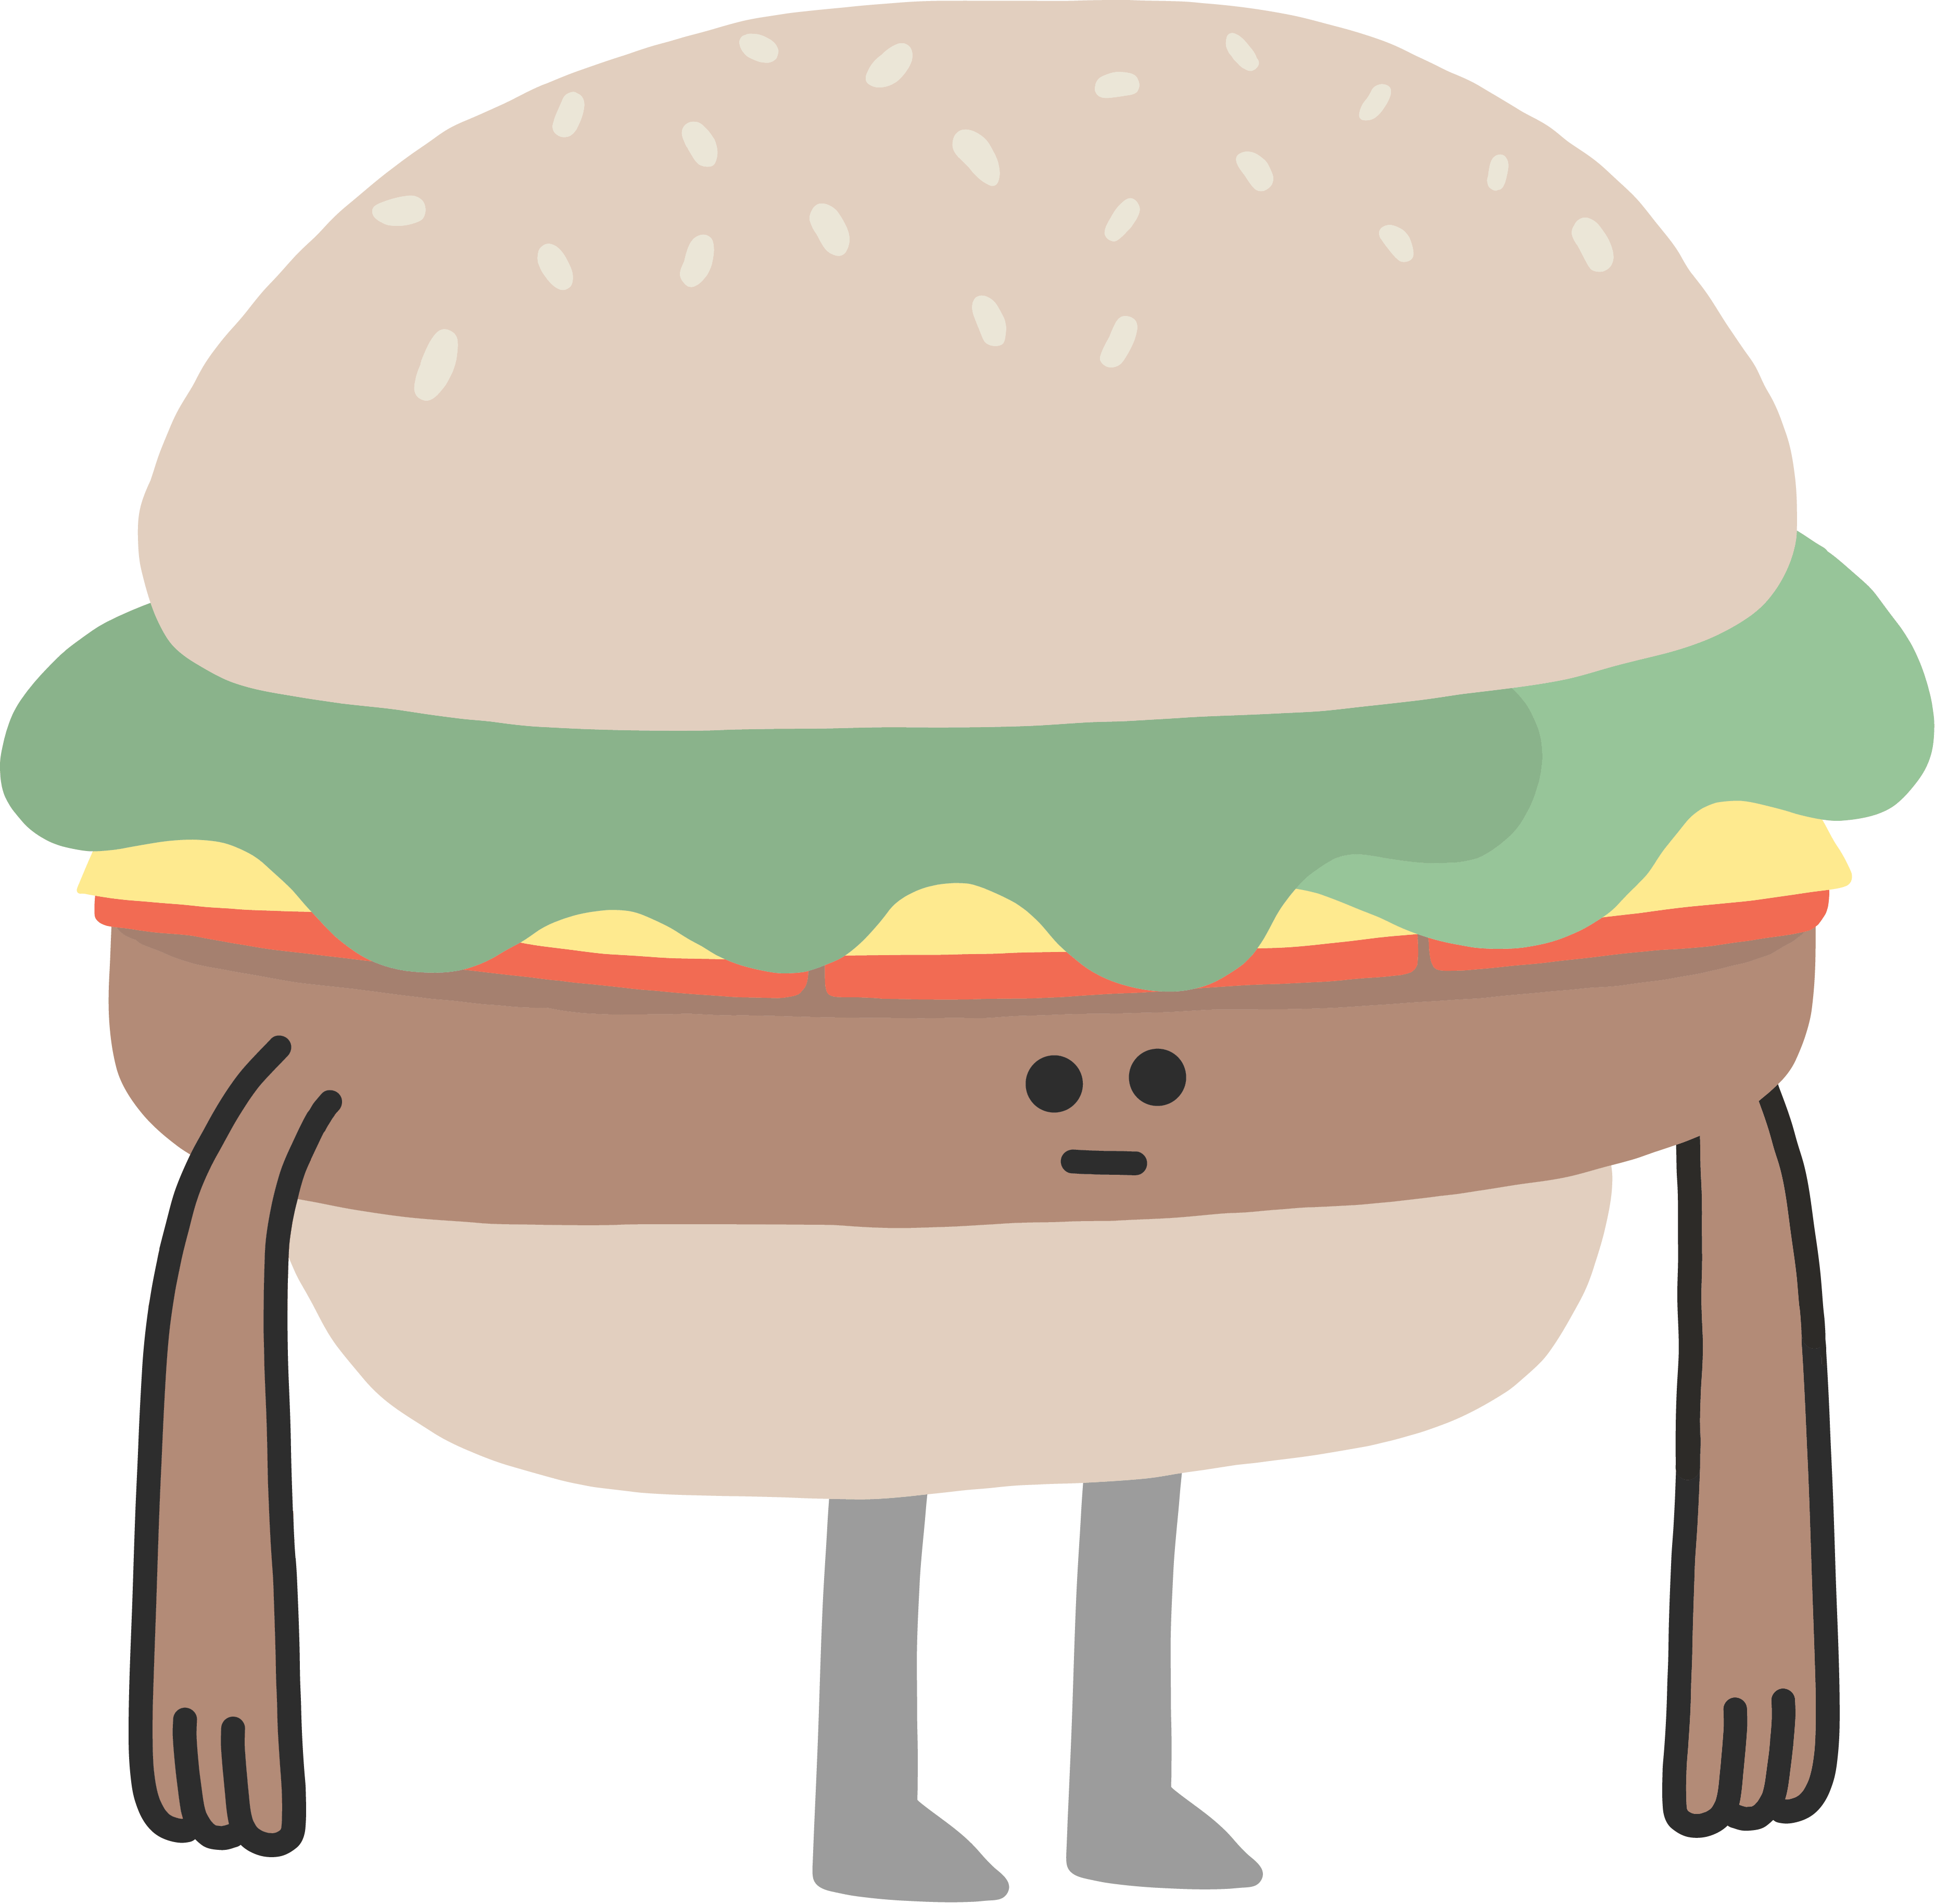 Hamburger clipart animation. Hungry fast food sticker